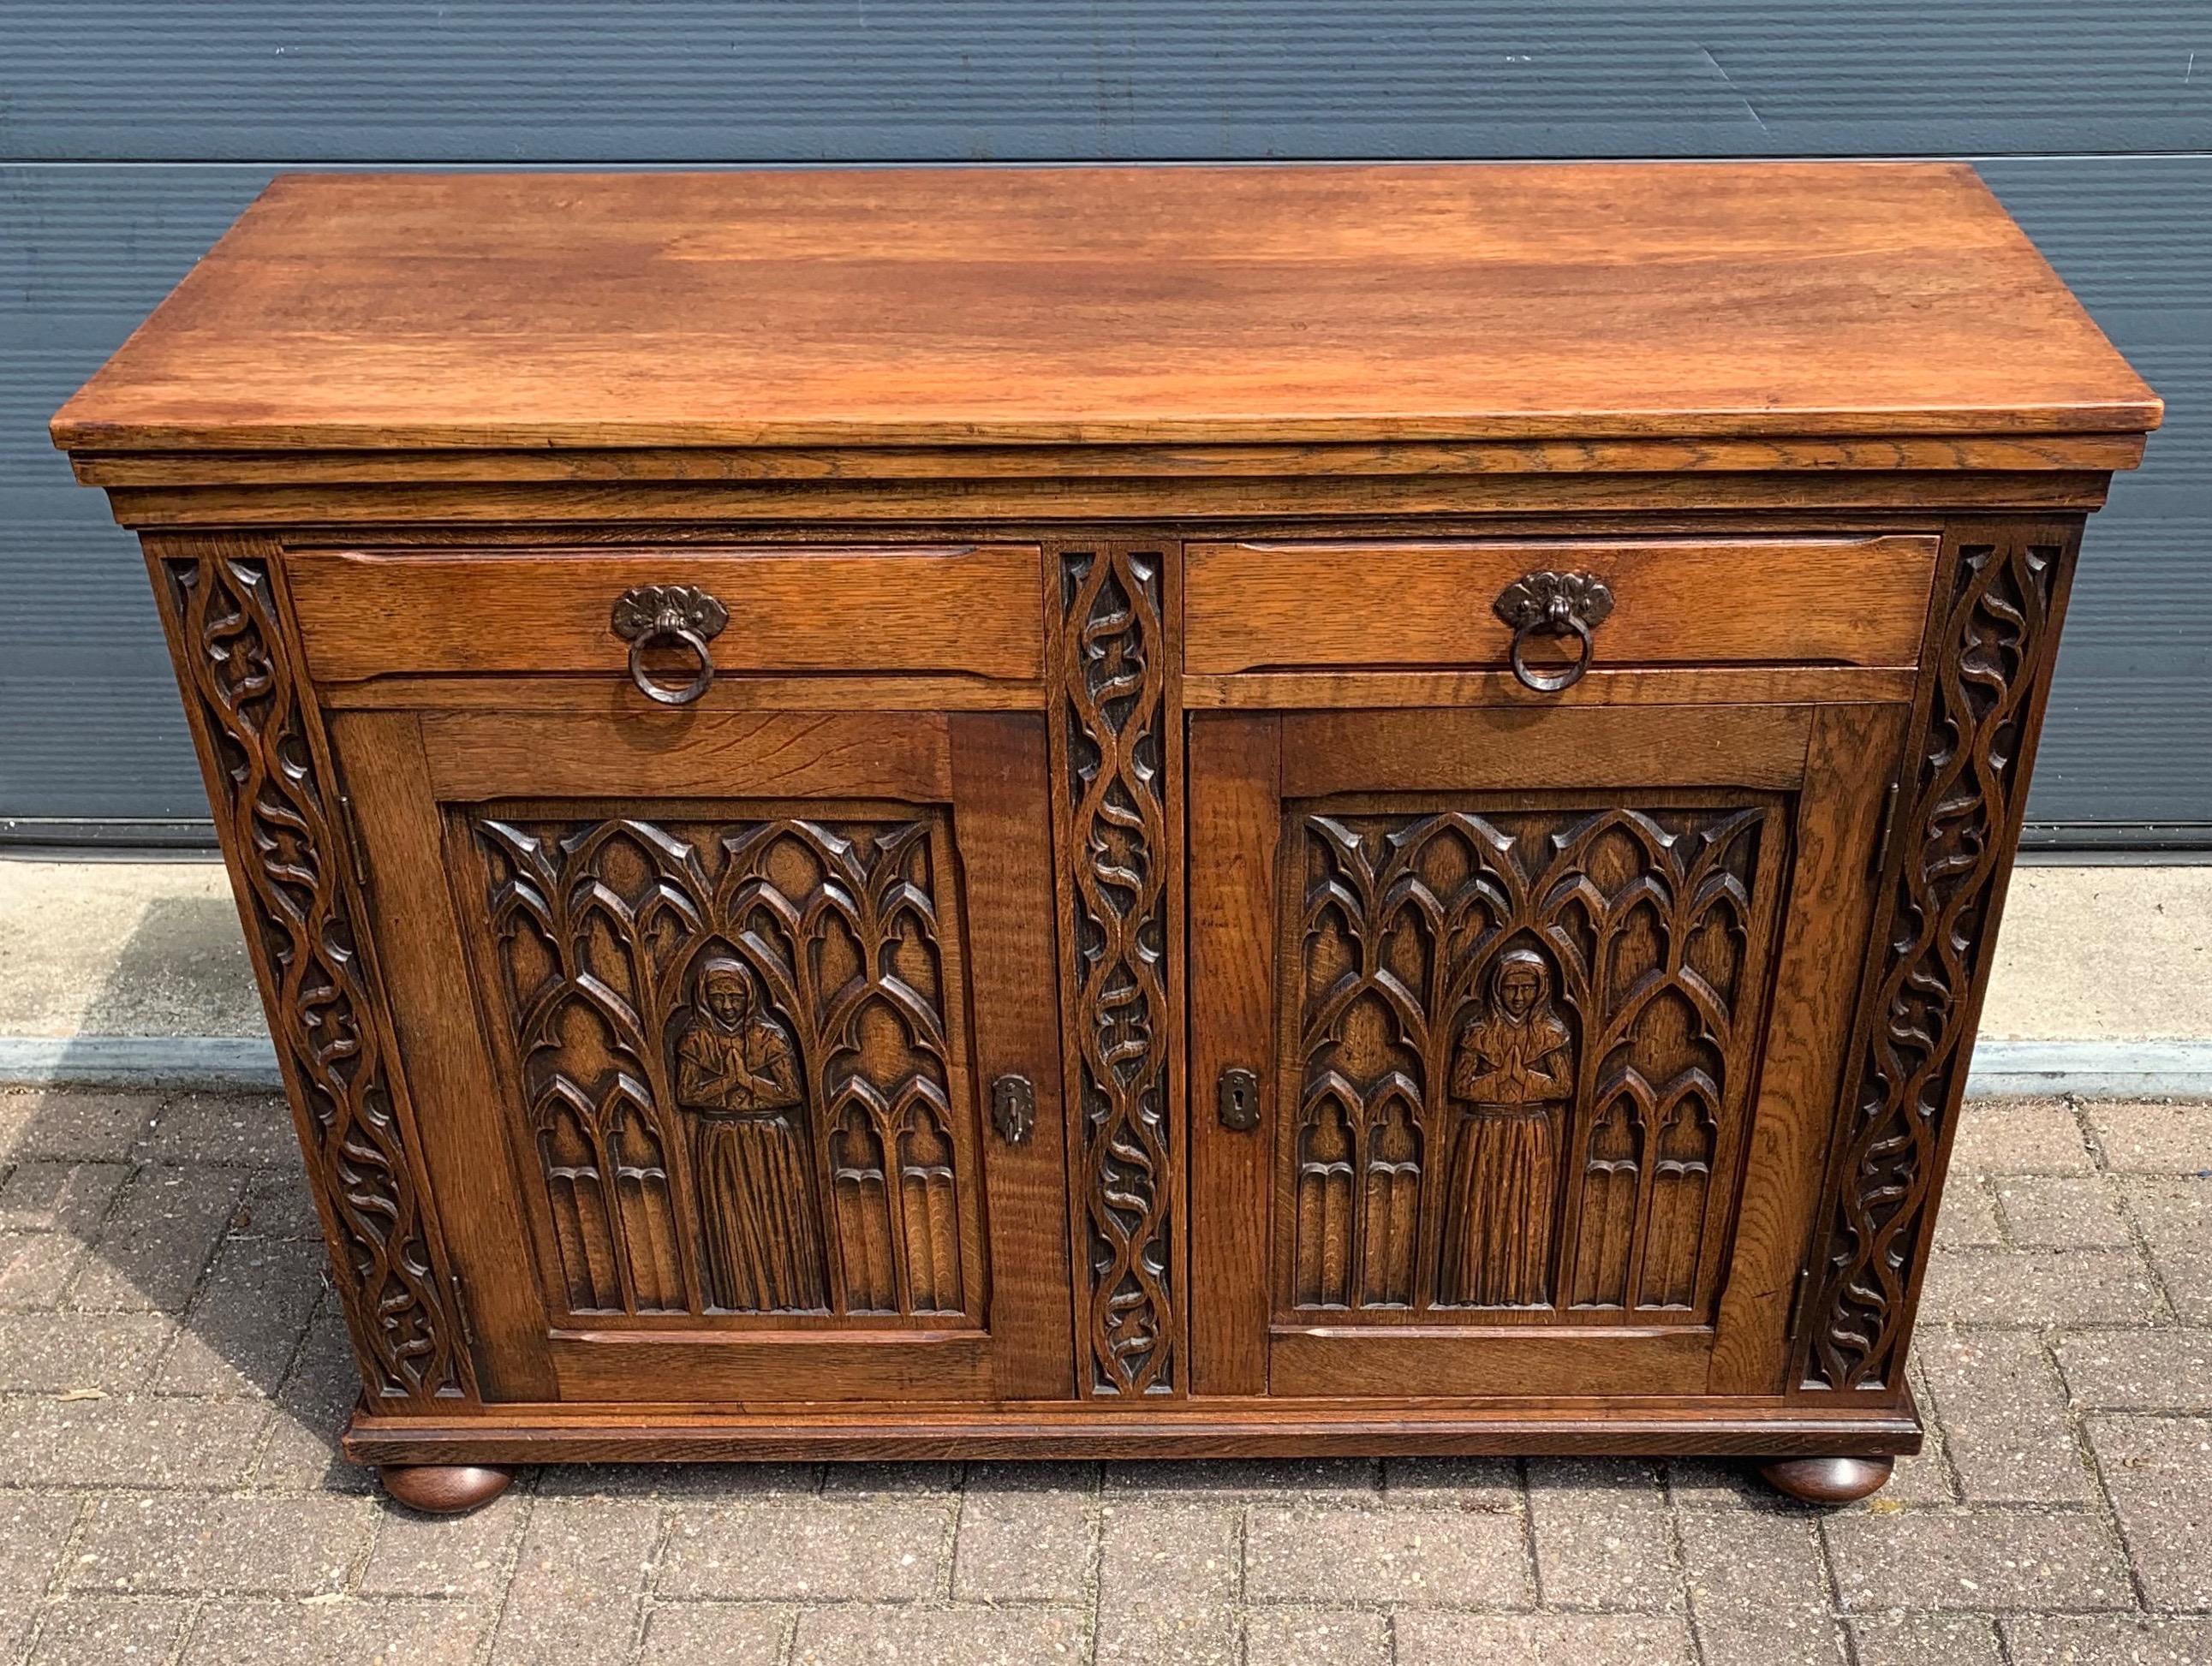 Dutch Meaningful Gothic Revival Cabinet / Small Credenza with Praying Nun Sculptures